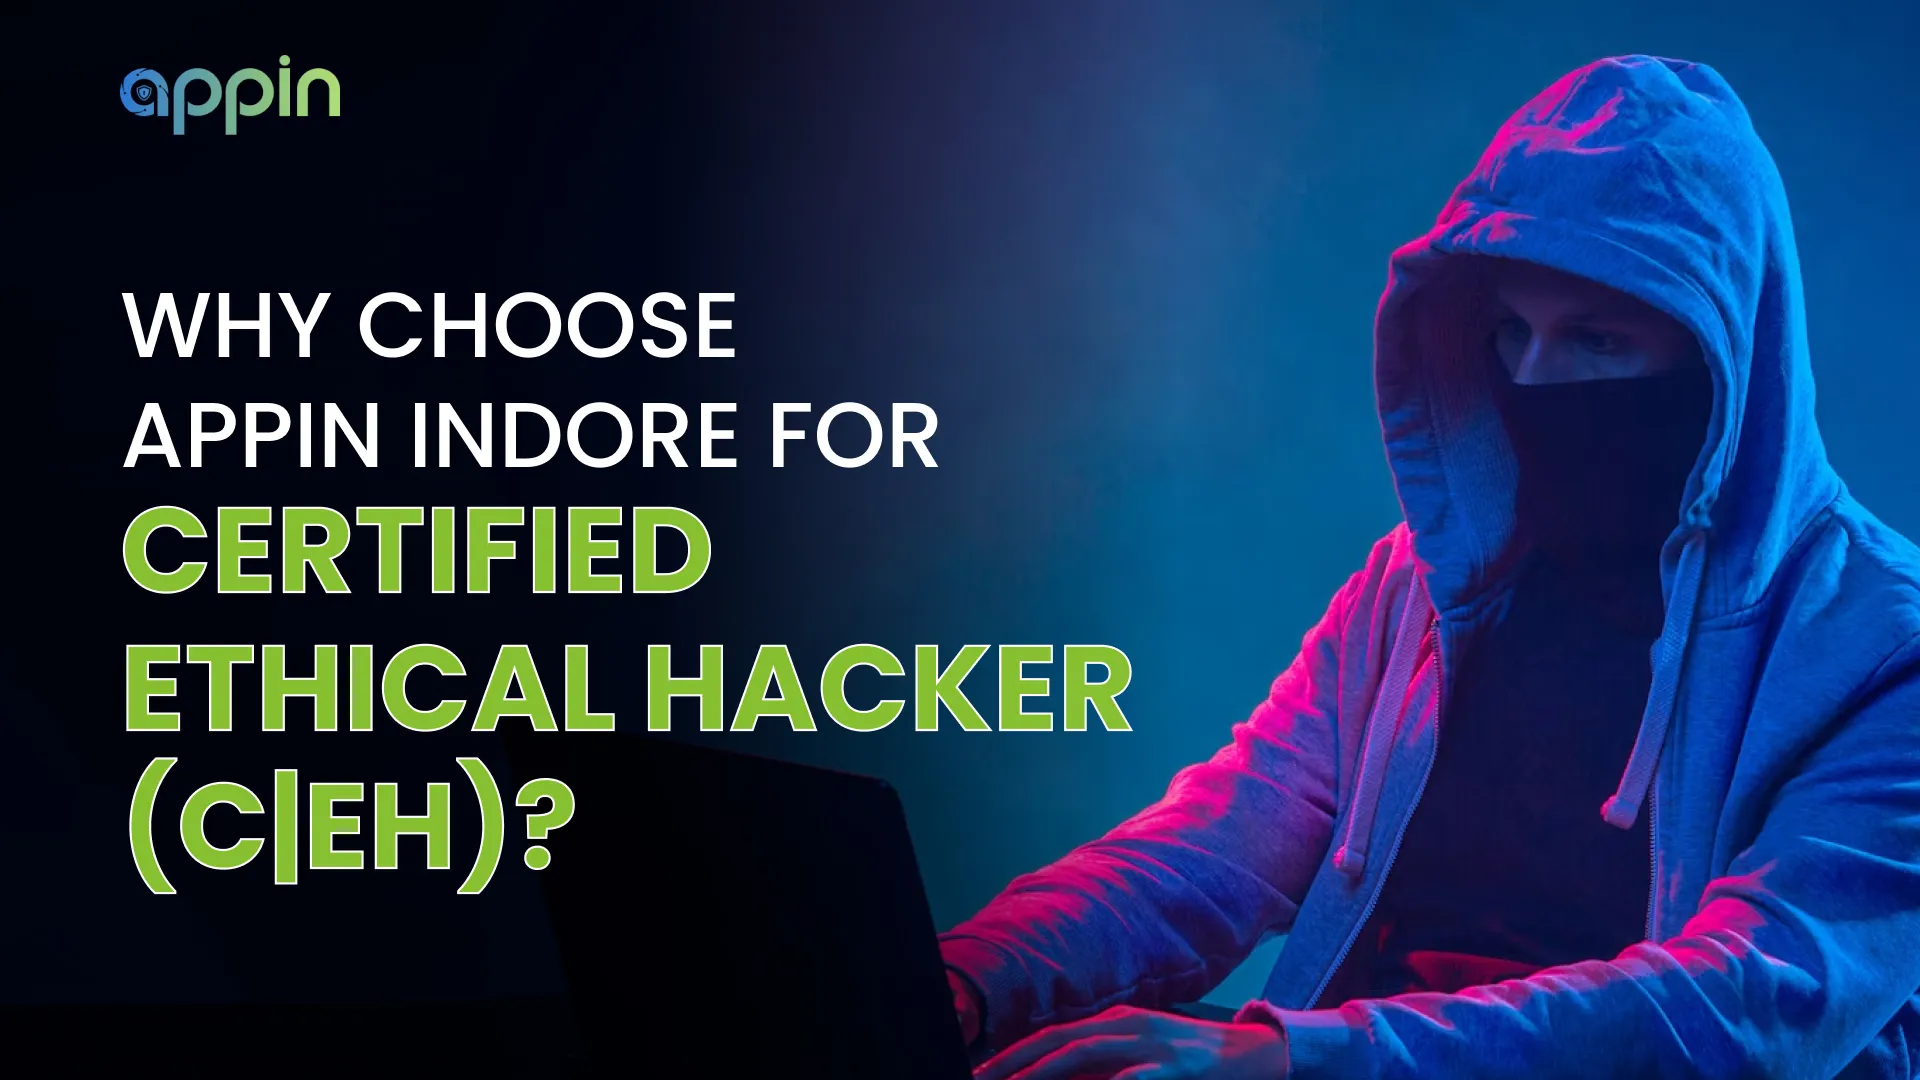 Why choose appin indore for certified ethical hacker